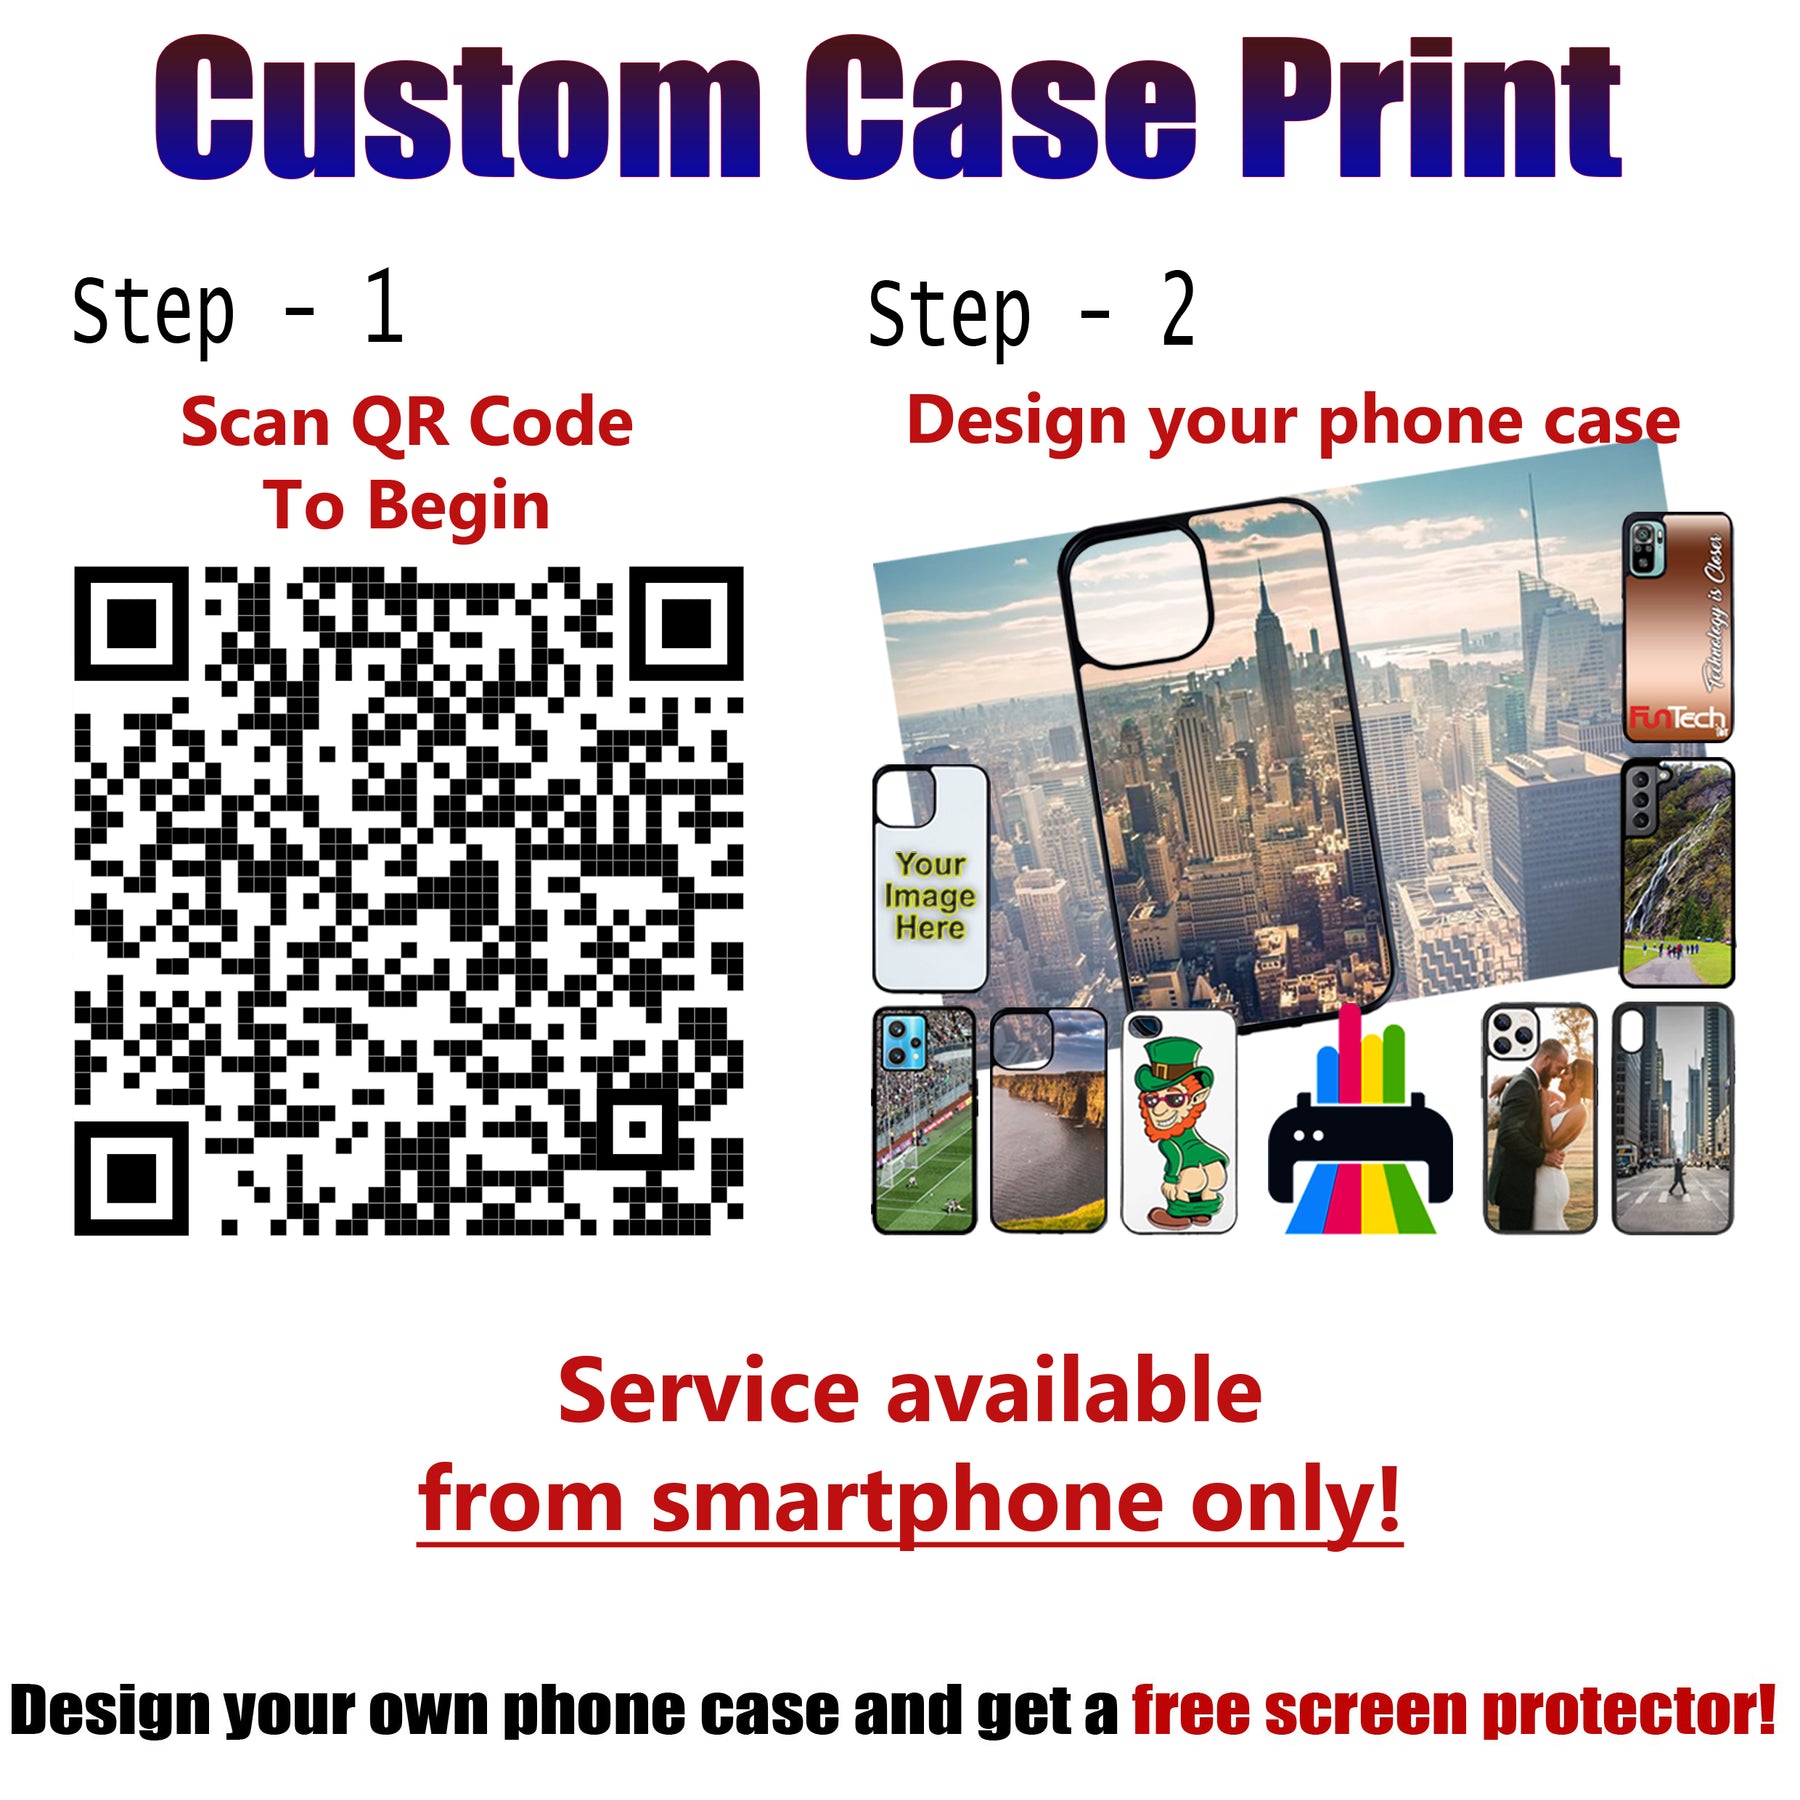 Design Your Own Phone Case And get a free screen protector